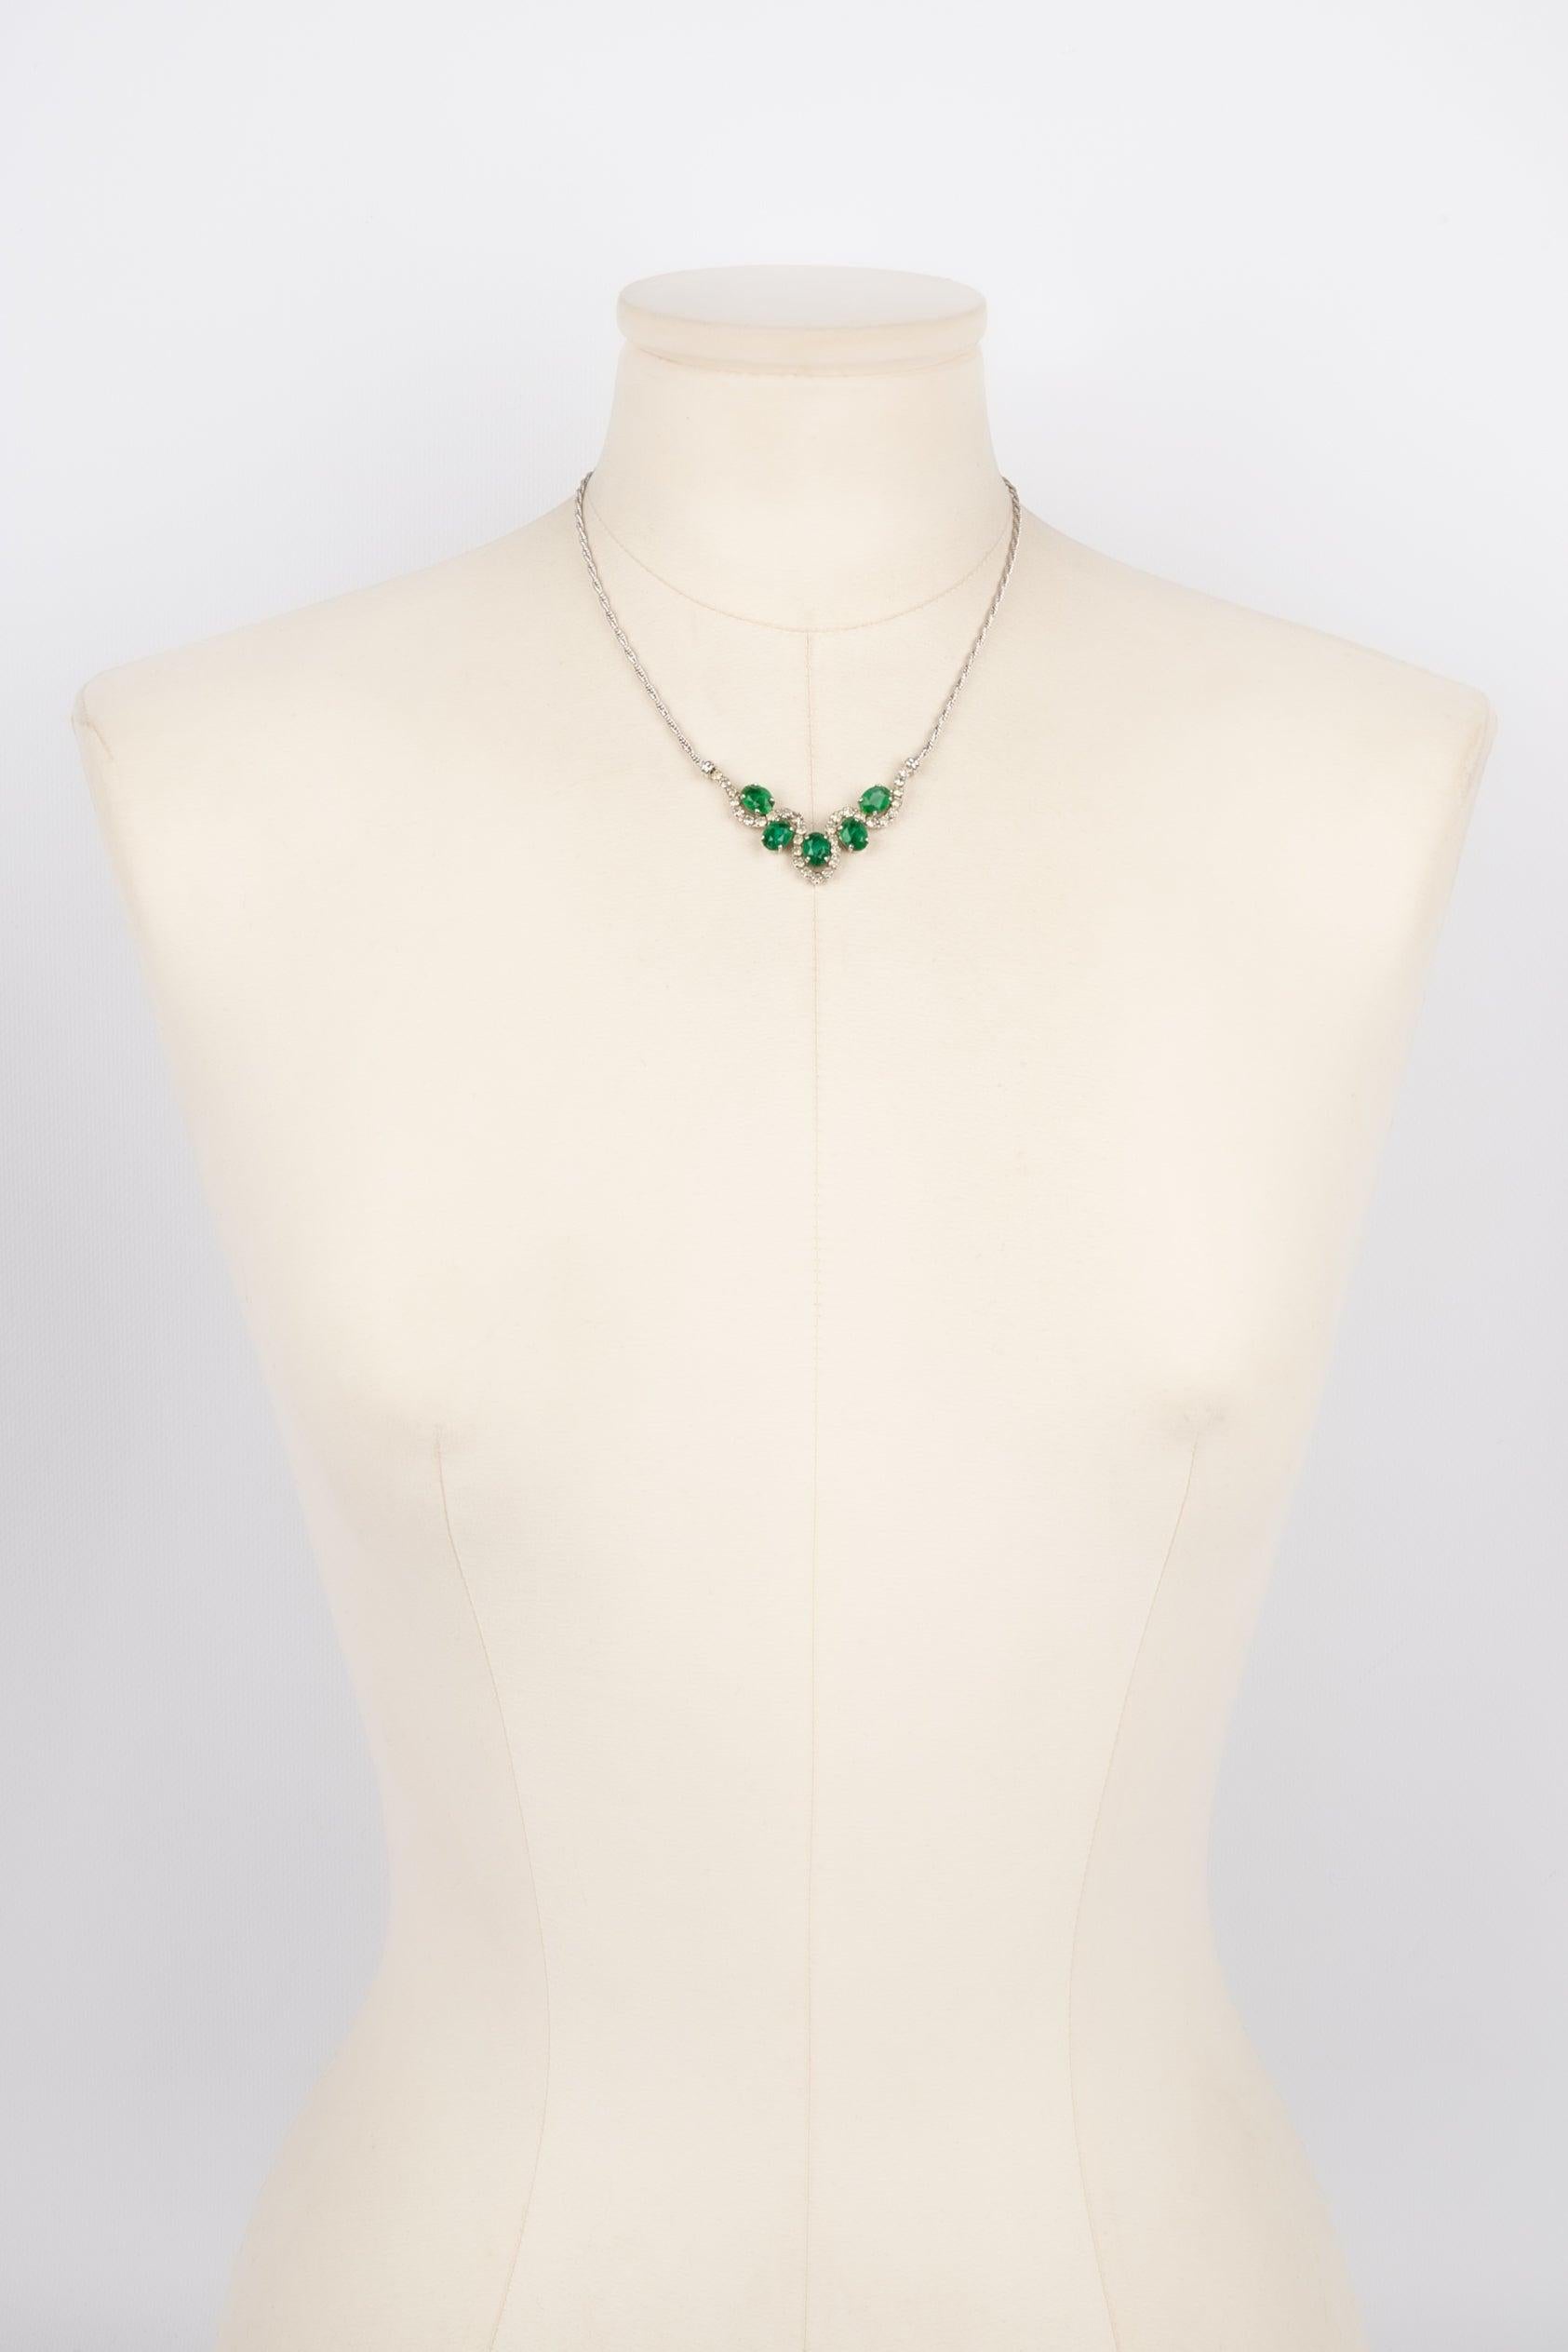 Dior - (Made in Germany) Silvery metal short necklace with green glass paste cabochons

Additional information:
Condition: Very good condition
Dimensions: Length: from 37 cm to 43 cm

Seller Reference: BC95